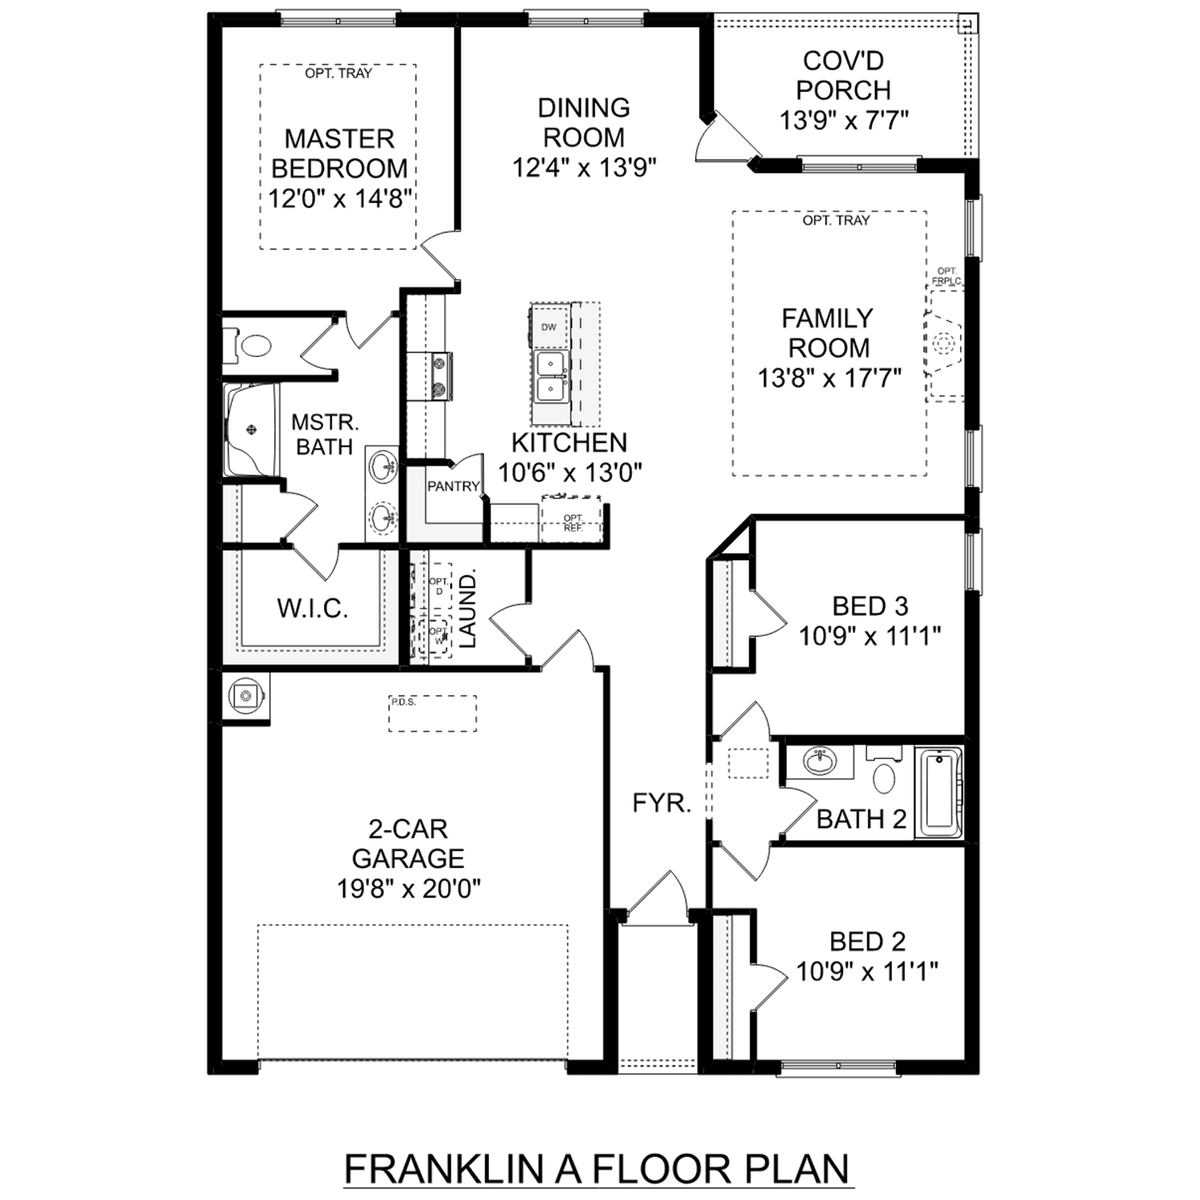 1 - The Franklin floor plan layout for 2615 Ajs Arbor Drive in Davidson Homes' Blue Spring community.